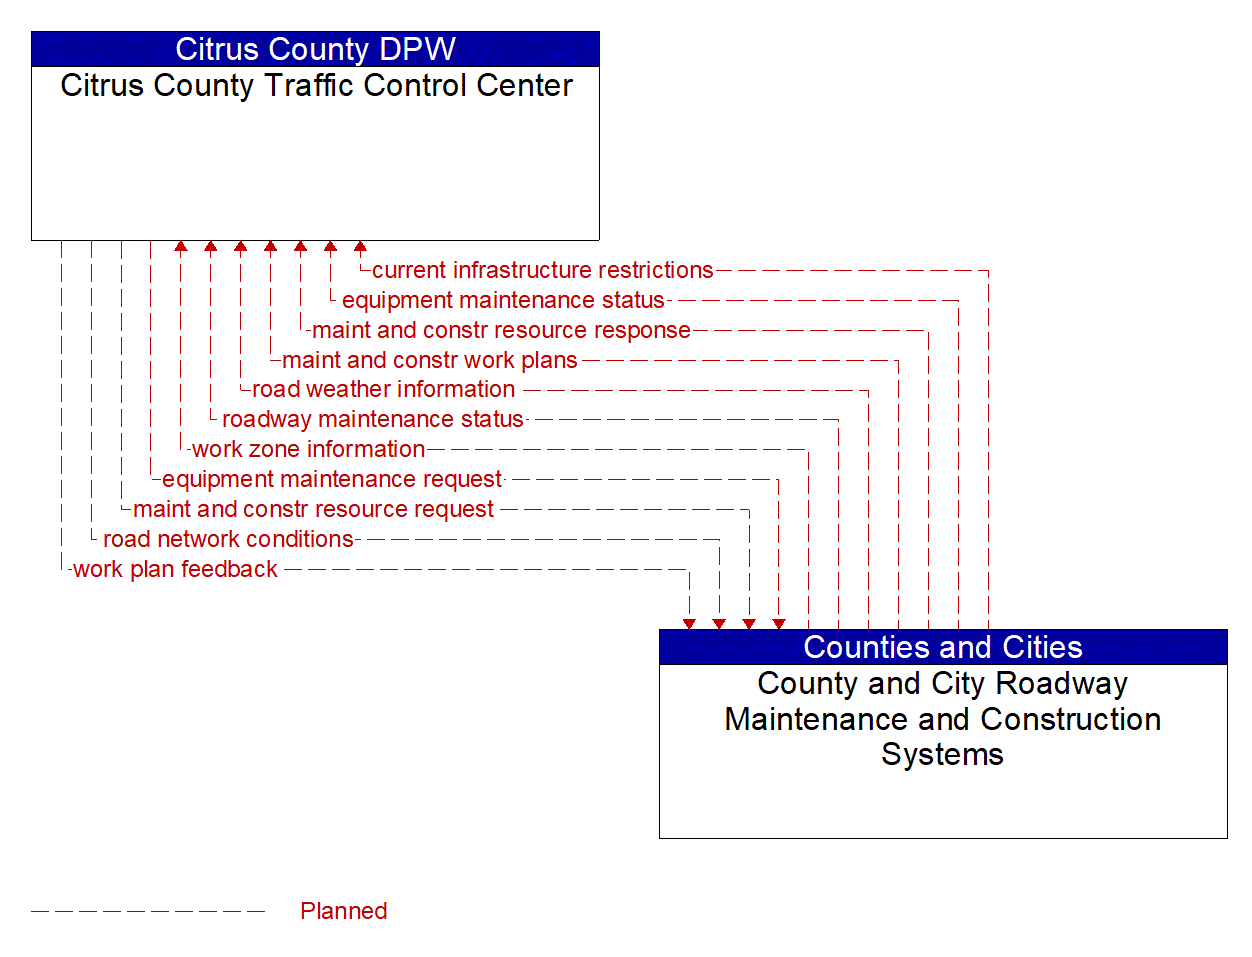 Architecture Flow Diagram: County and City Roadway Maintenance and Construction Systems <--> Citrus County Traffic Control Center